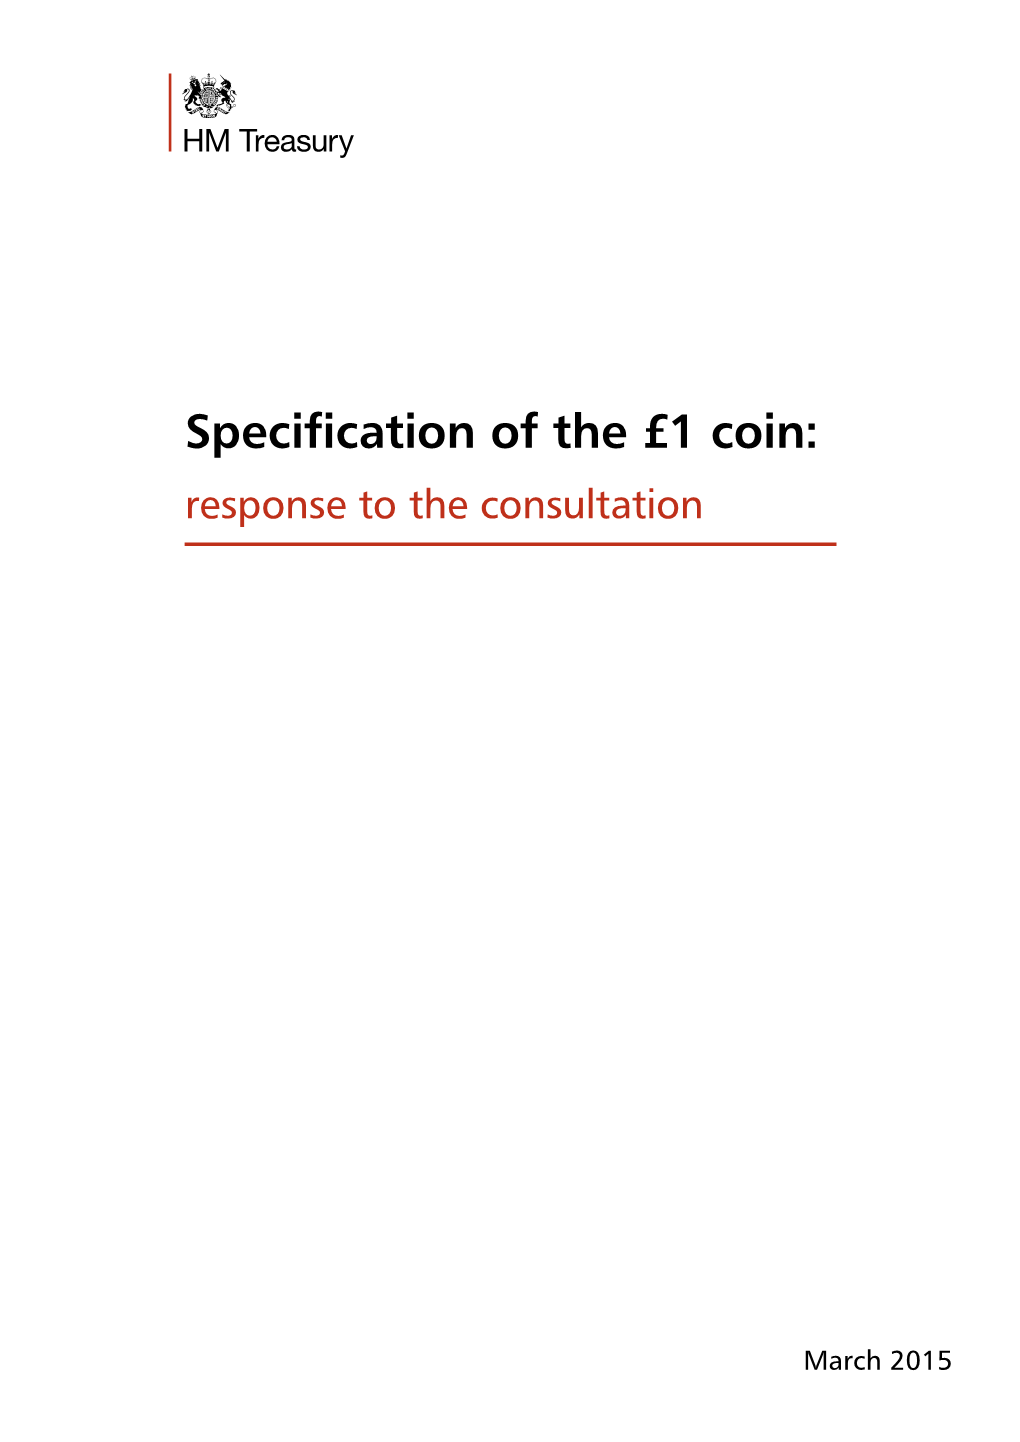 Specification of the £1 Coin: Response to the Consultation